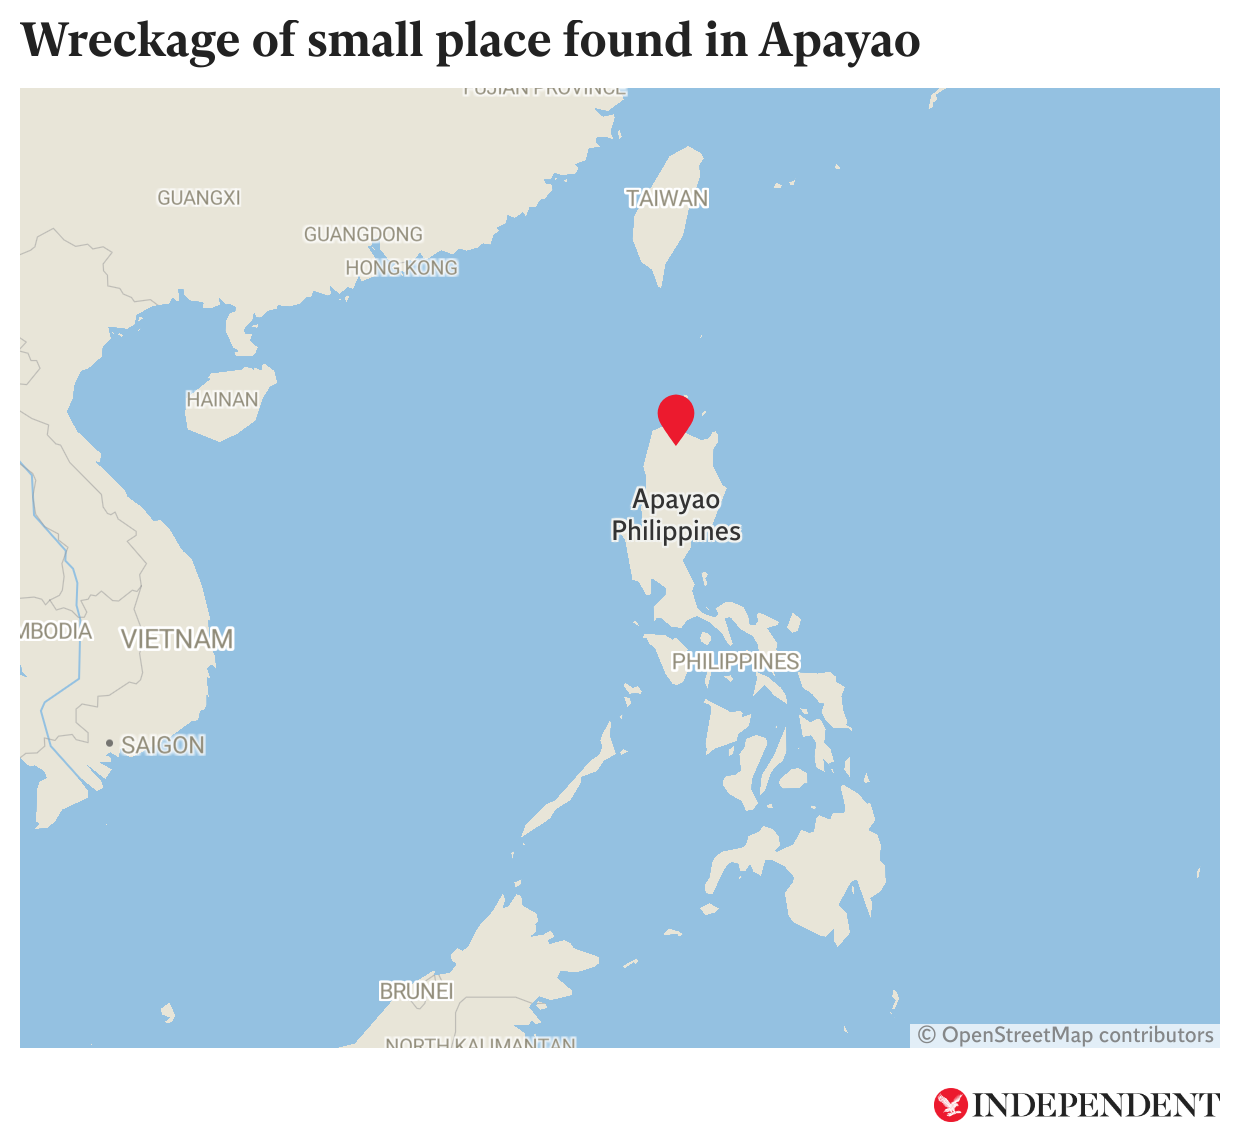 Wreckage of a small plane with two persons on board was found in Apayao